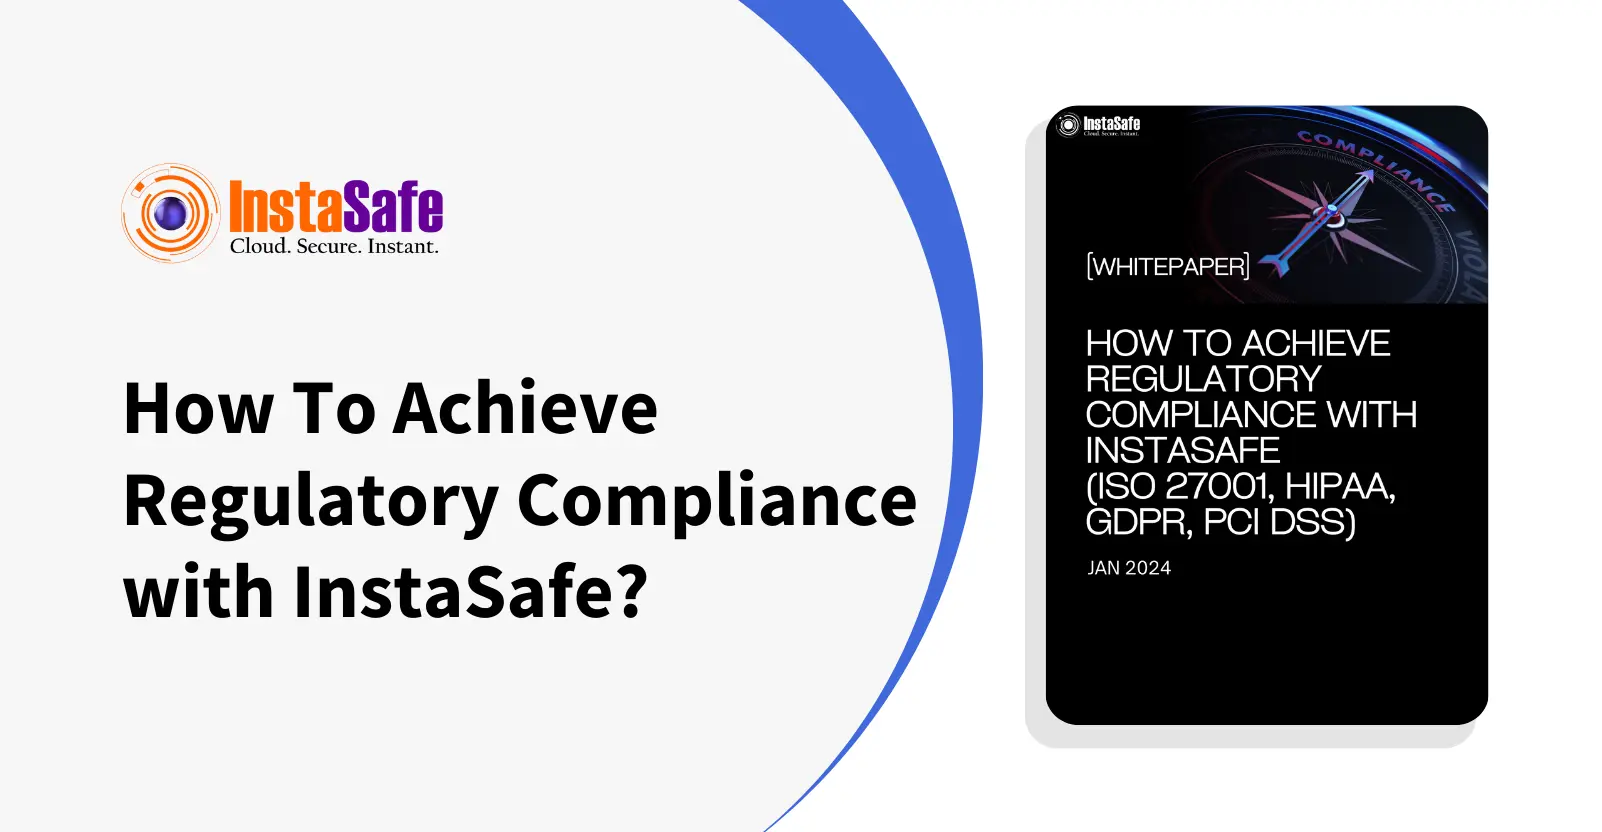 How To Achieve Regulatory Compliance with InstaSafe?